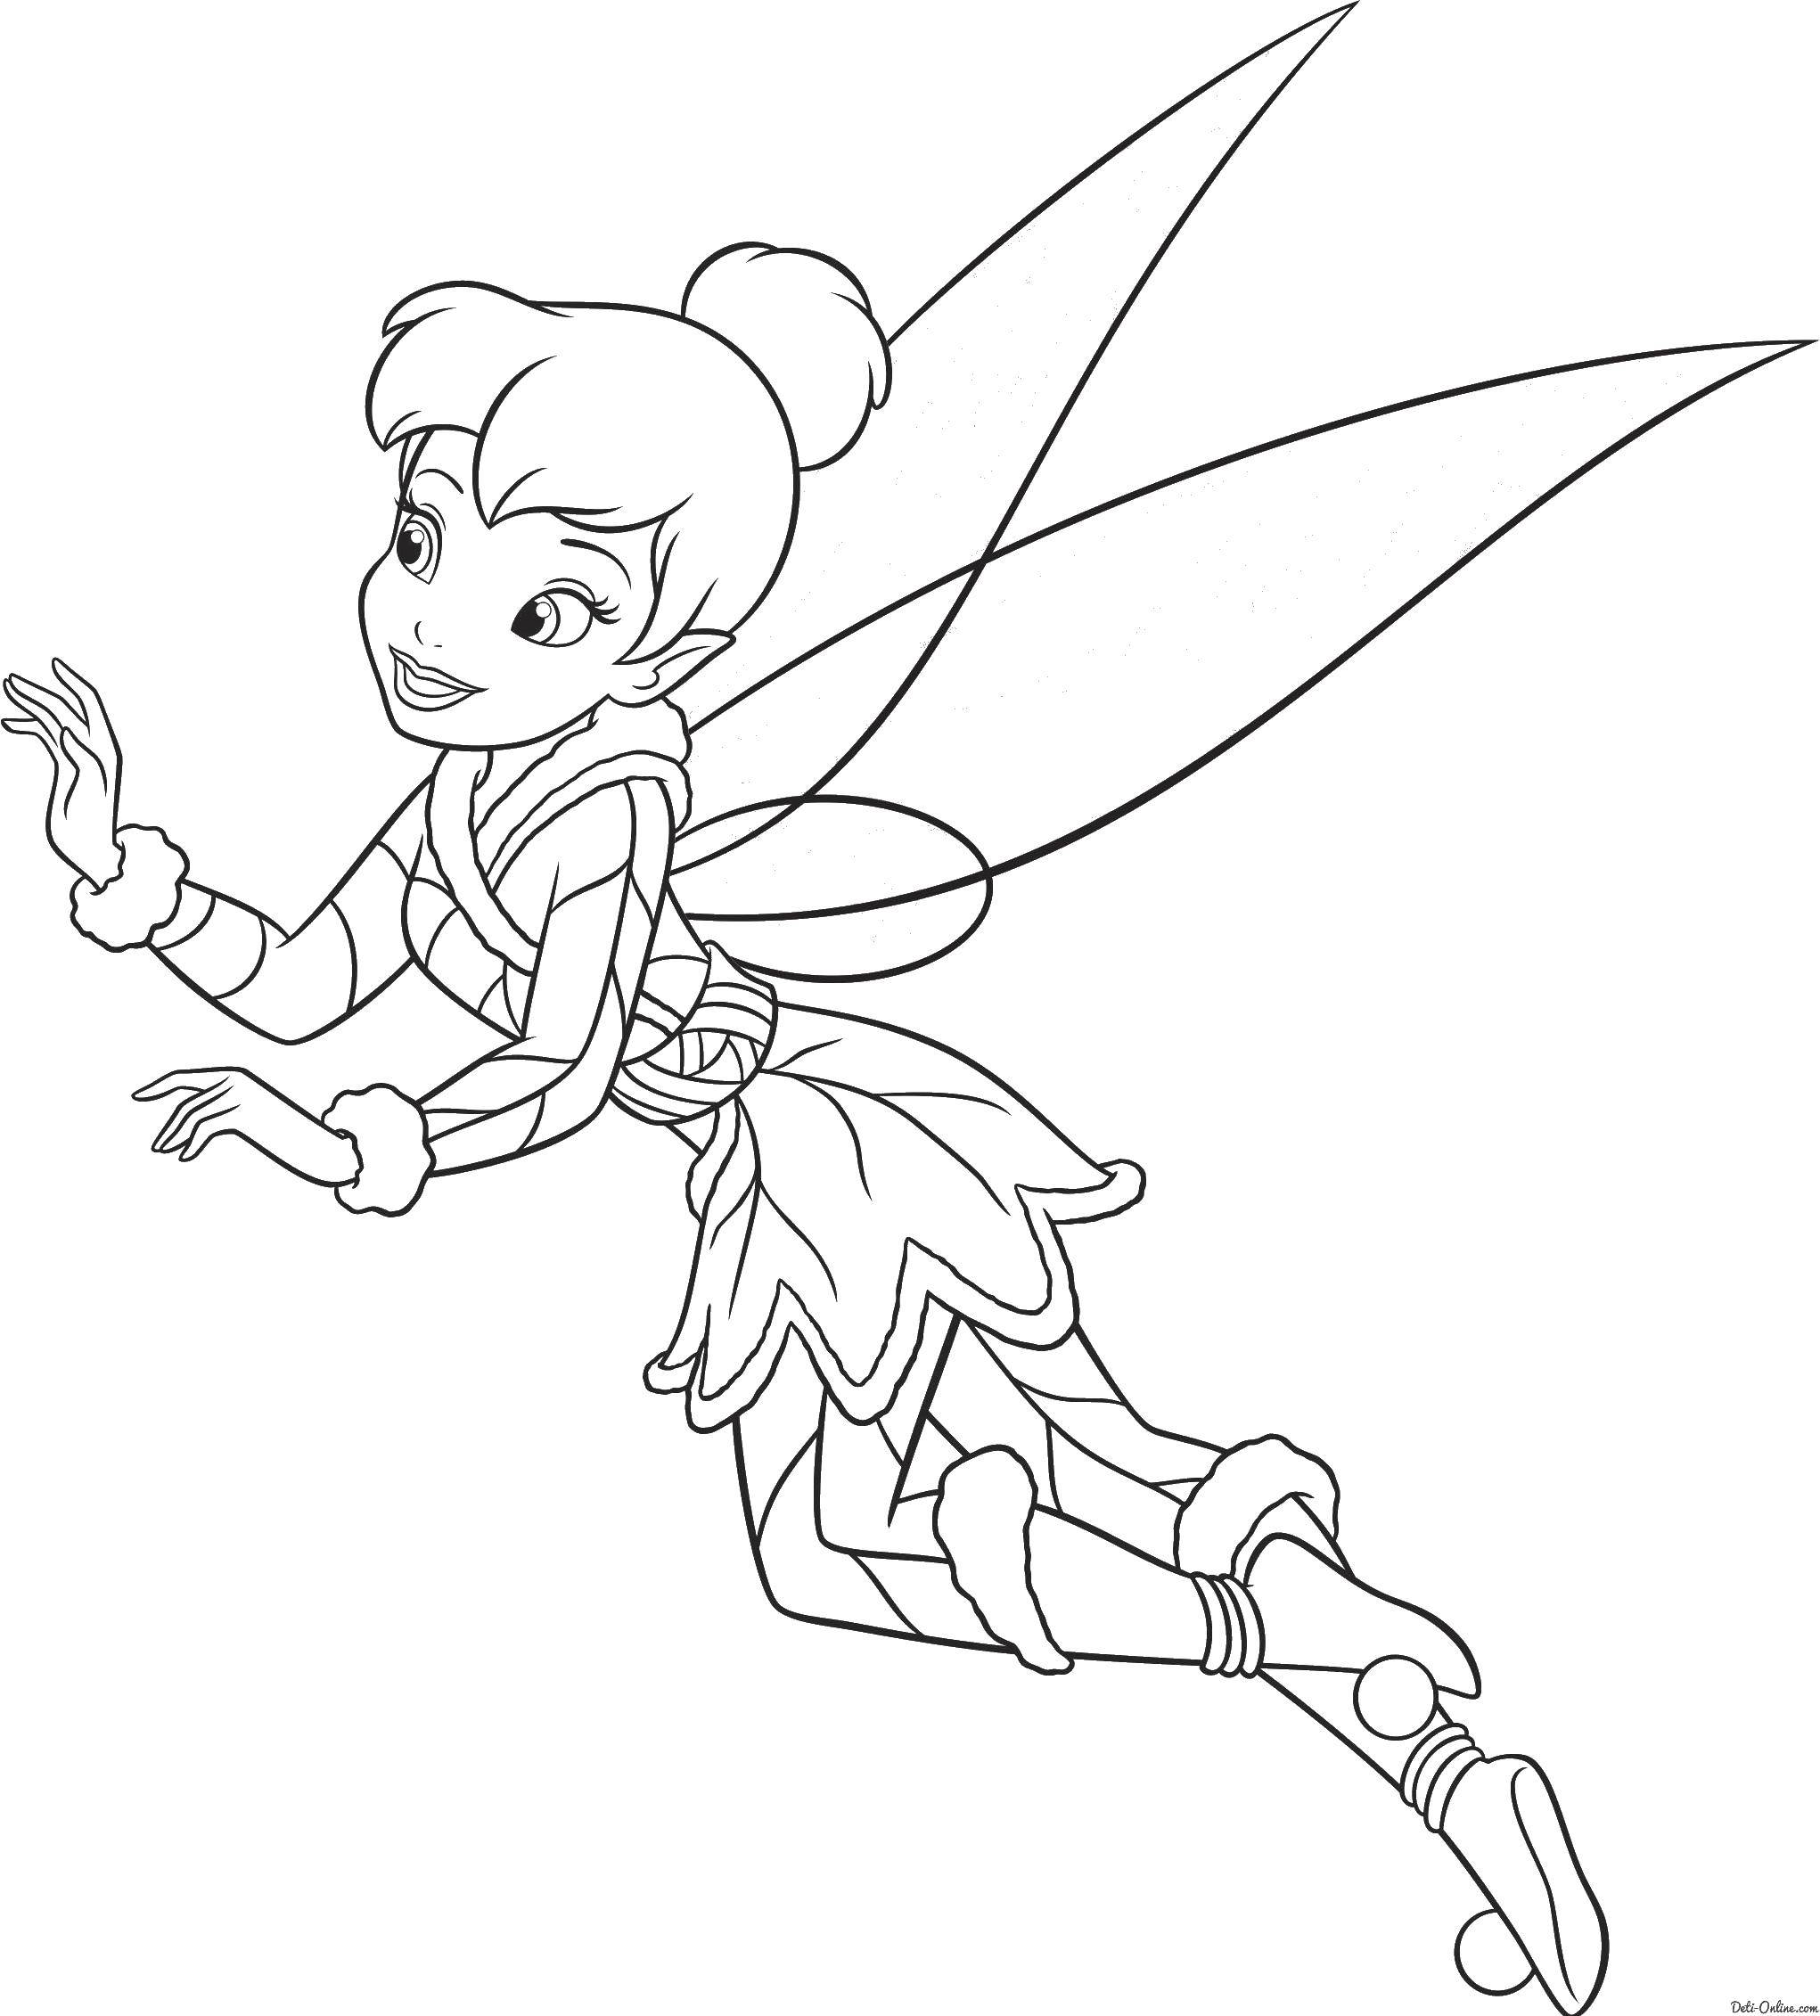 Coloring Fairy with wings. Category Ding , Ding Ding. Tags:  fairy.